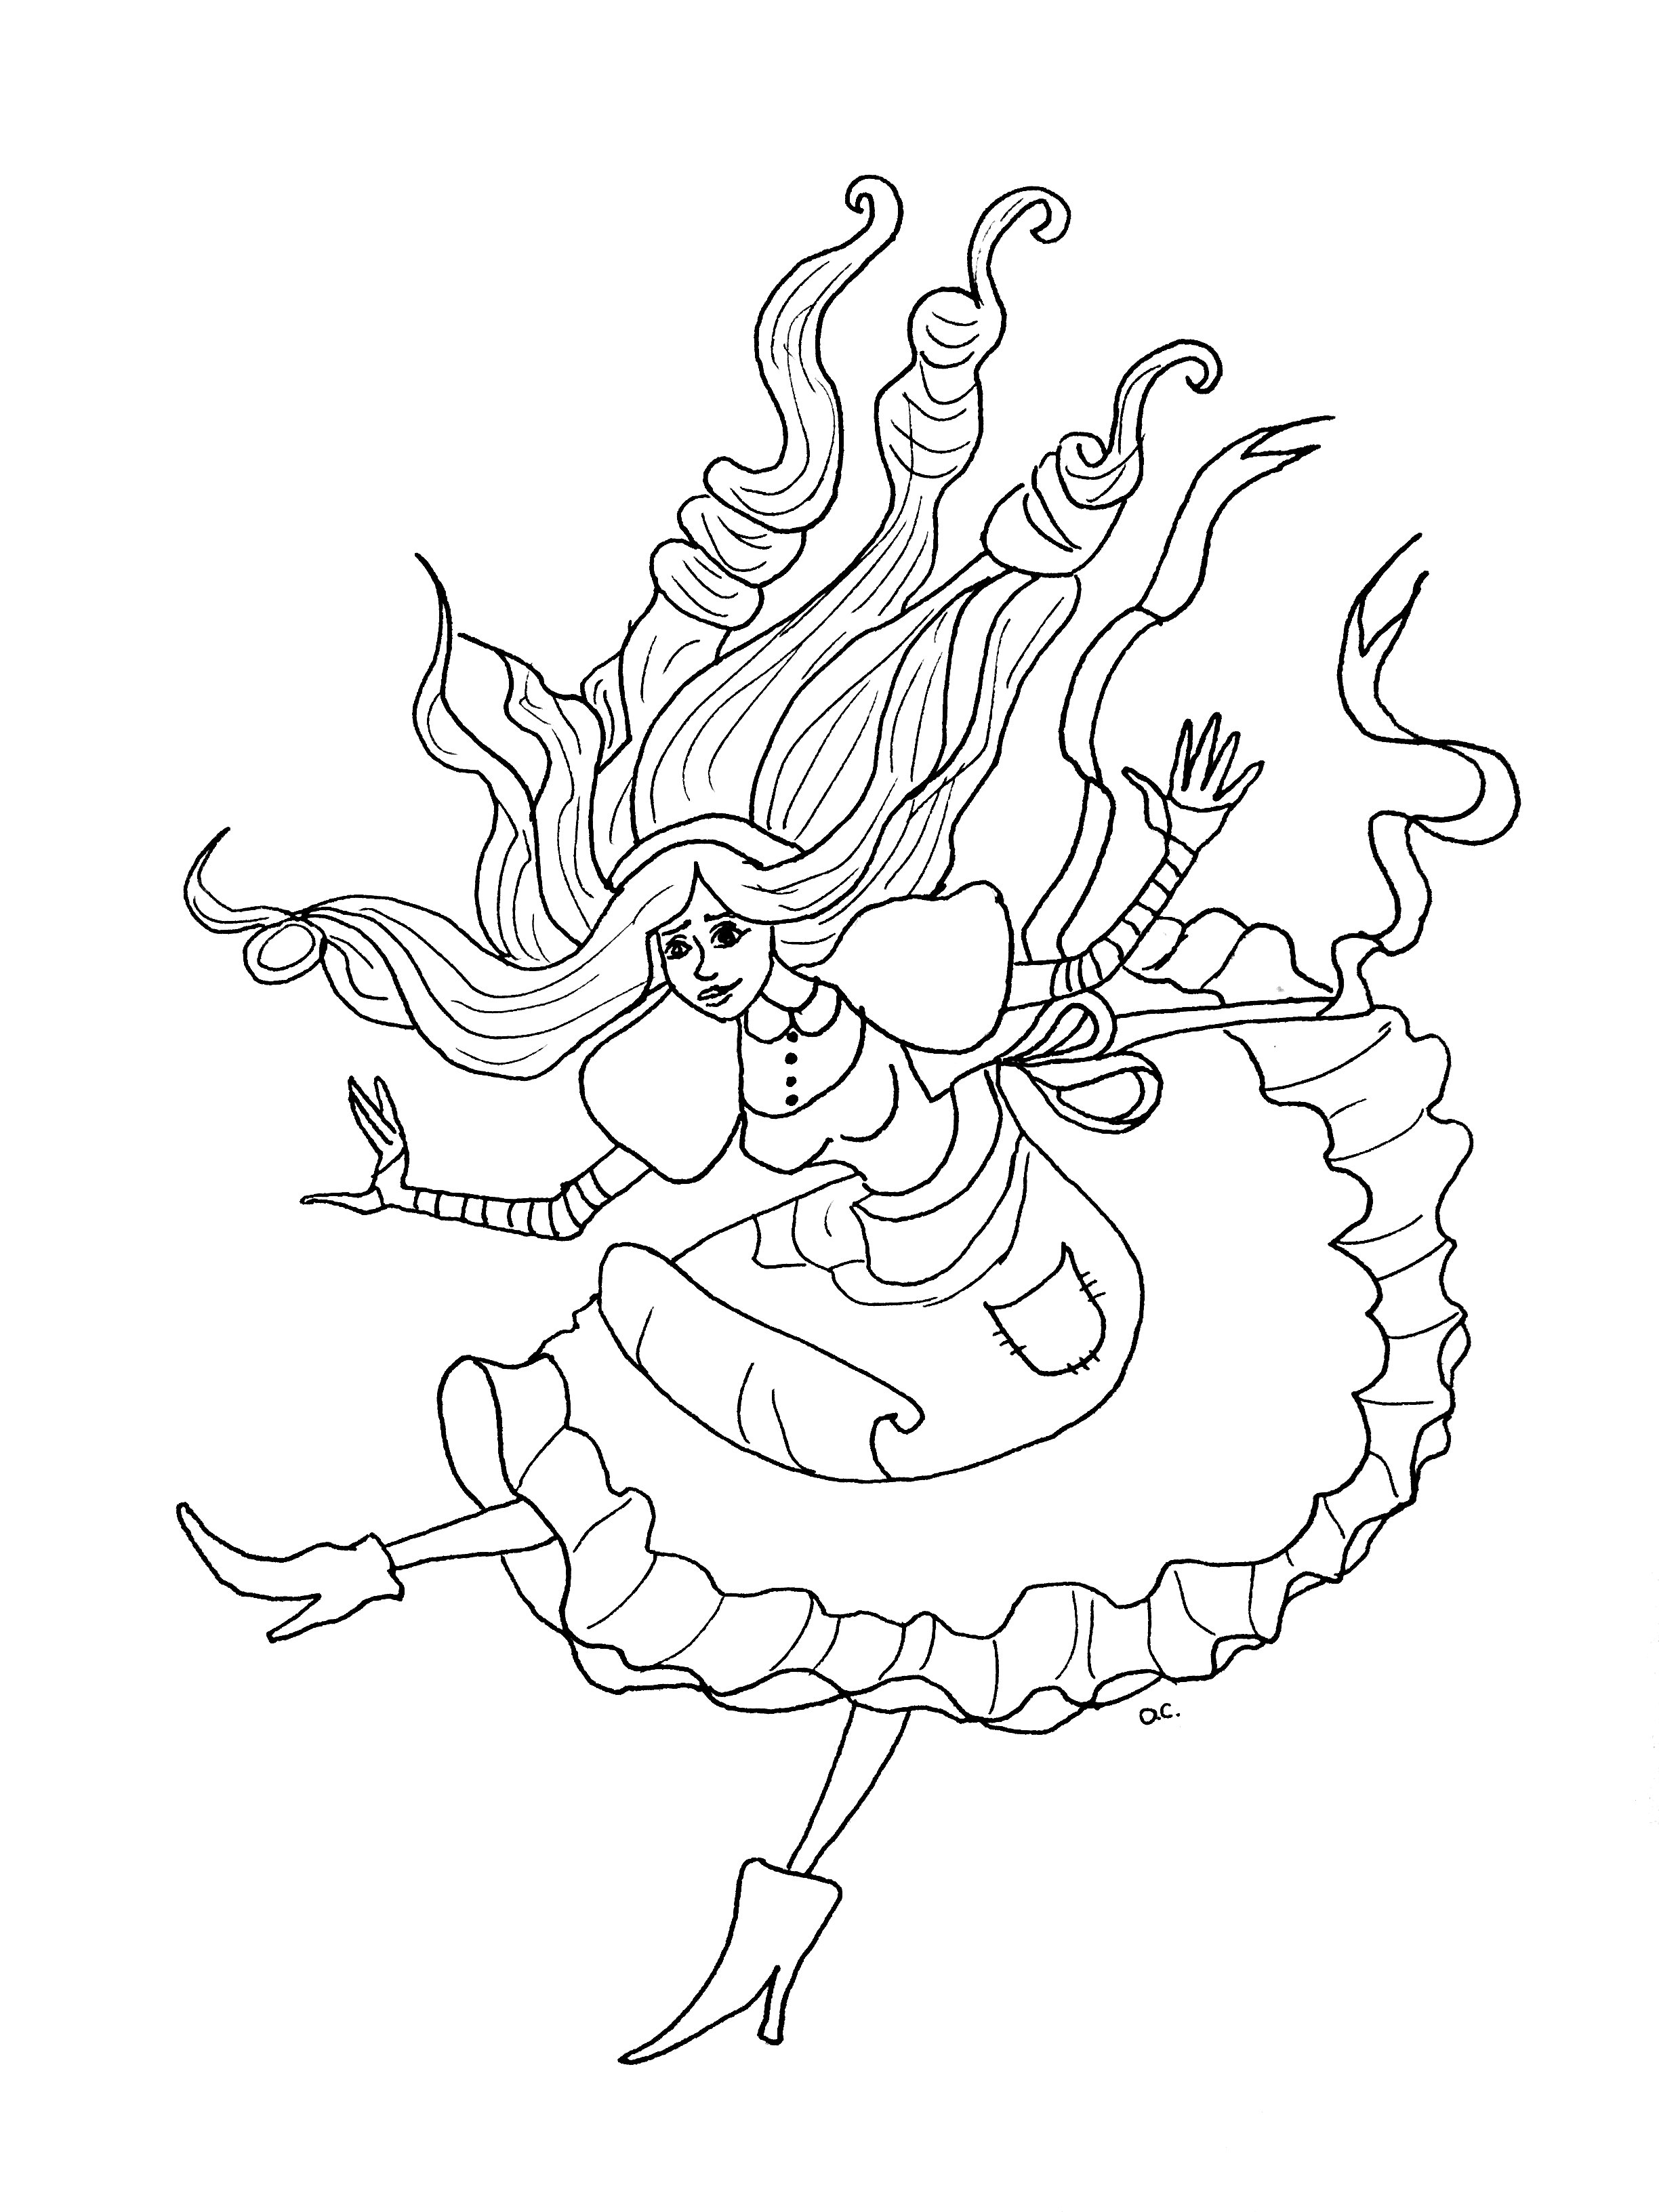 Exclusive Coloring page inspired by Alice in Wonderland, Artist : Olivier